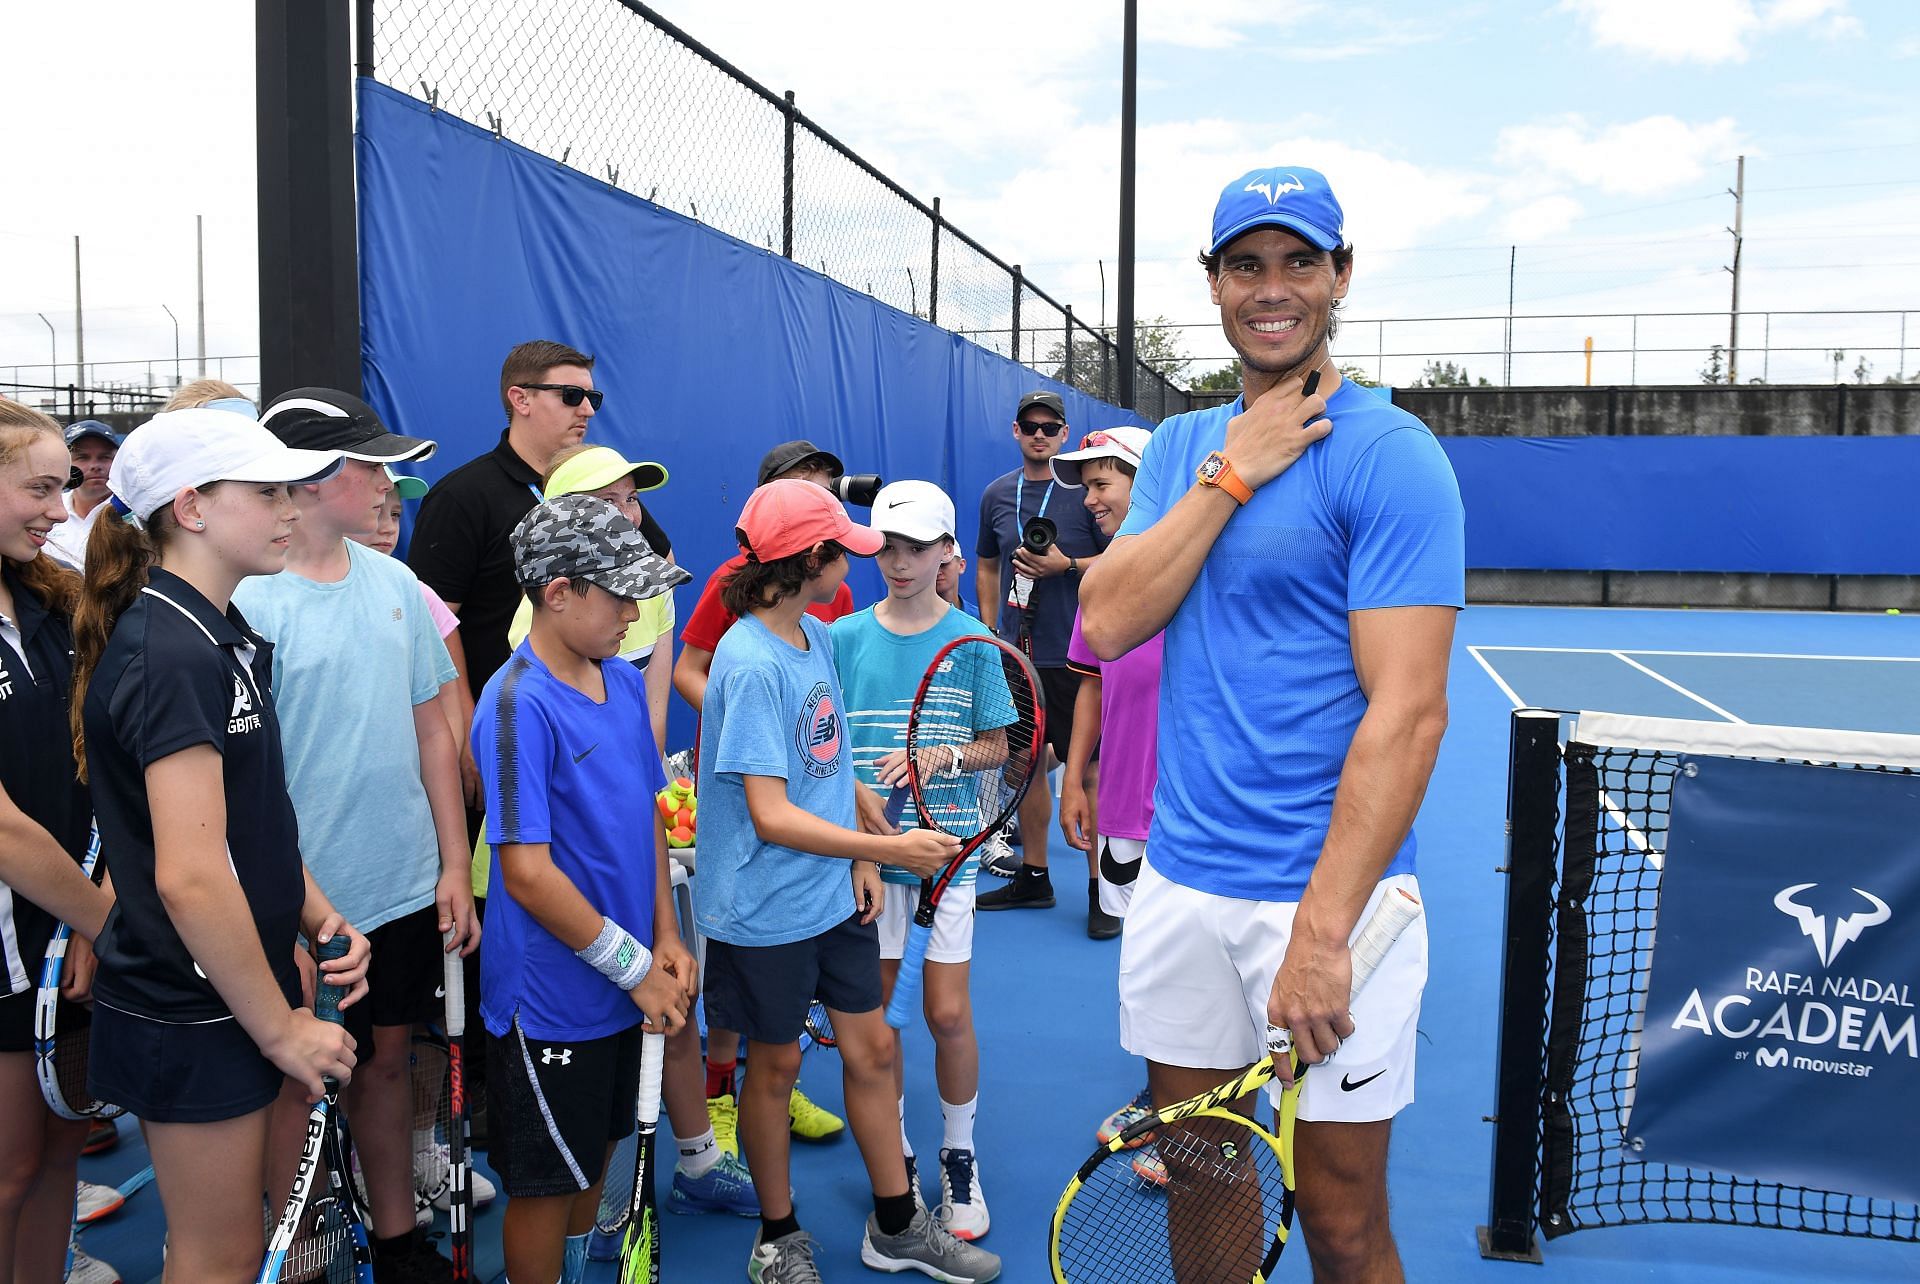 Rafael Nadal with young tennis players.